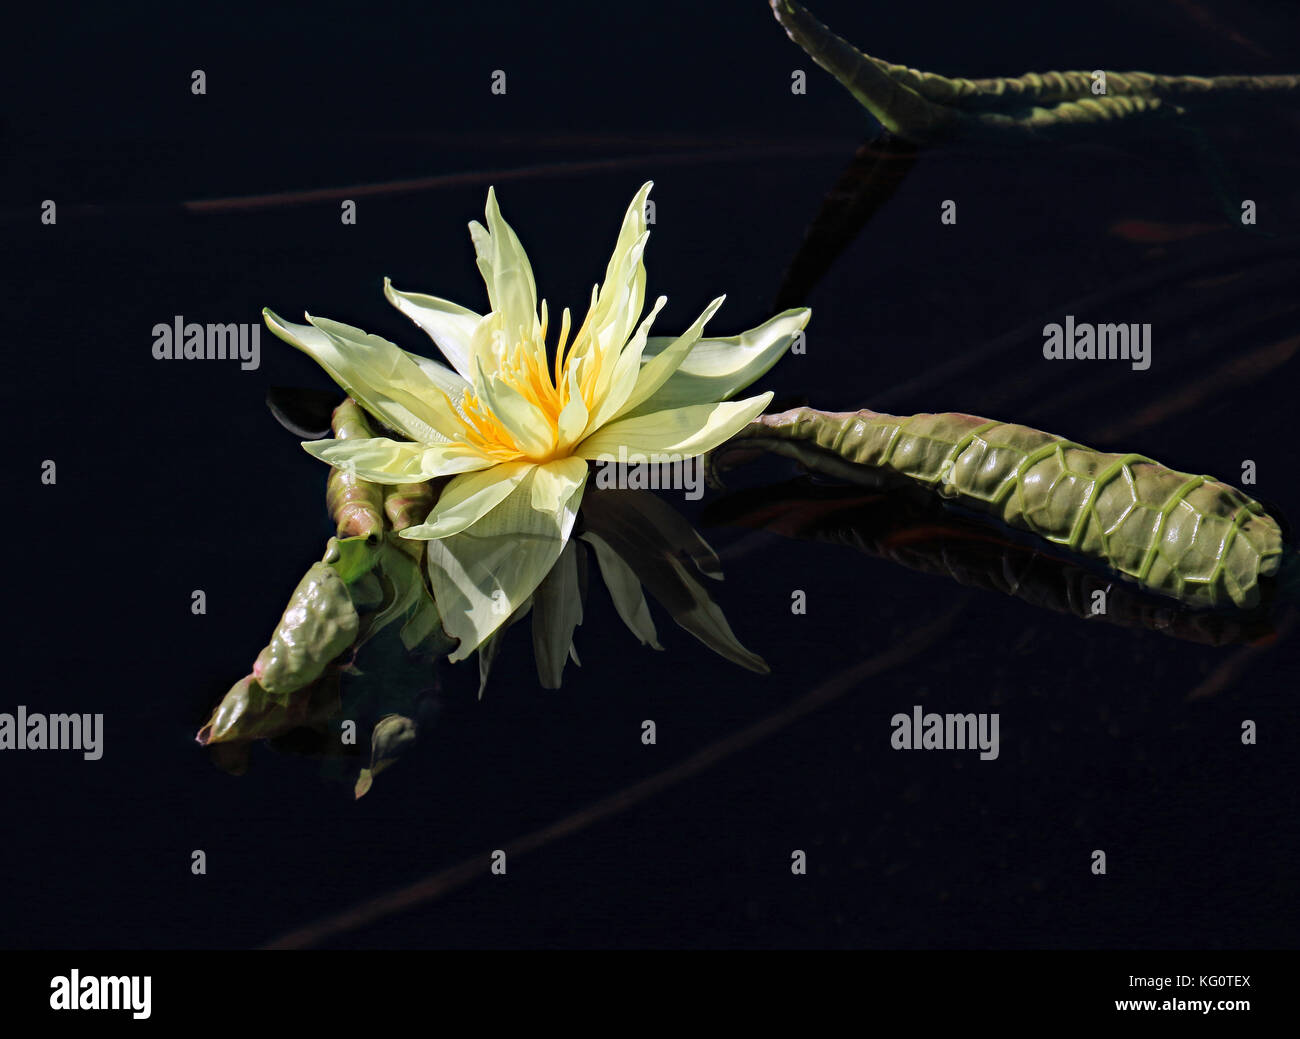 The stark black background enhances the vibrant beauty of this bright yellow water lily specimen and its curved and highly textured leaves Stock Photo